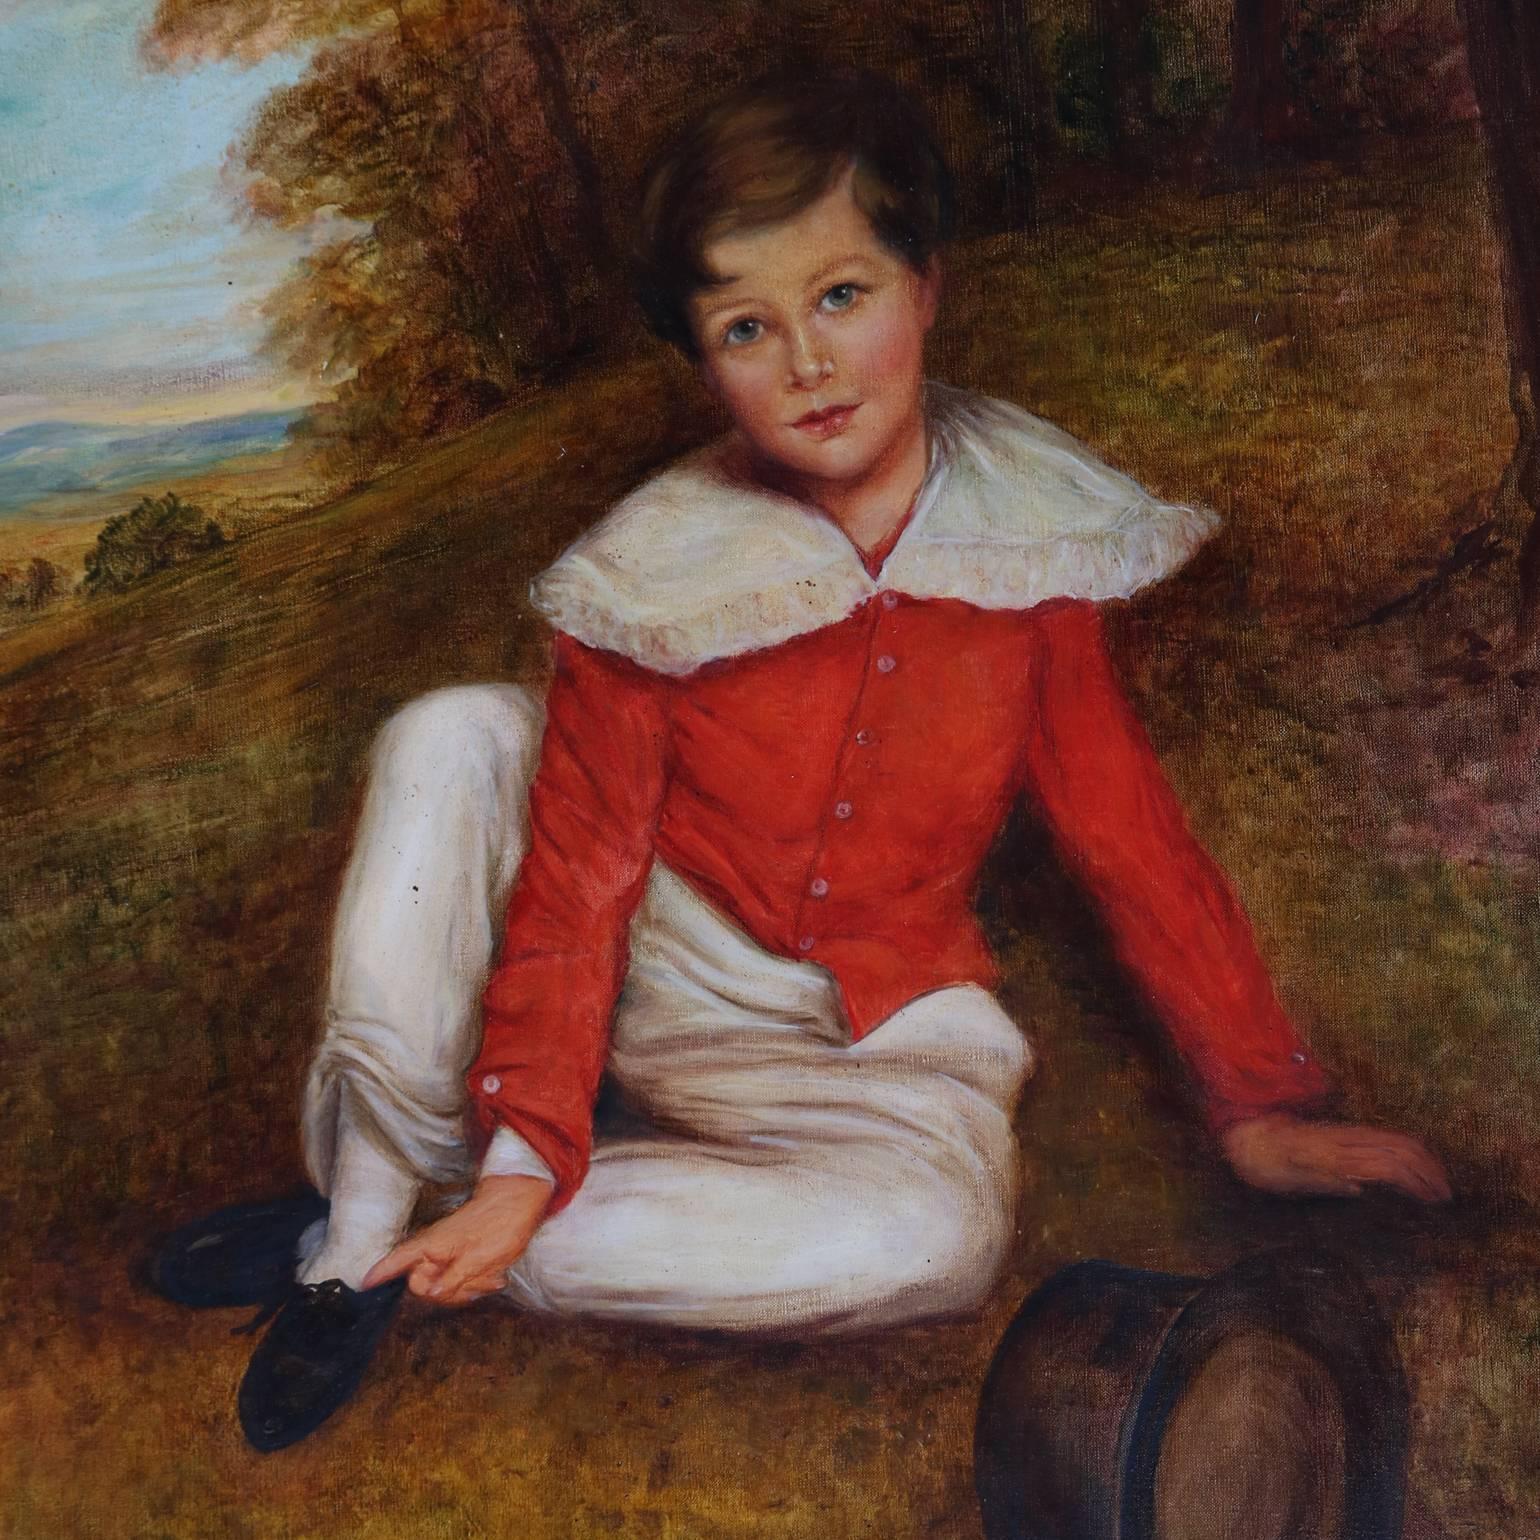 Vintage and large oil on canvas painting of seated child signed Toni Trevari, seated in gold gilt surround, 20th century

Measures: 40" H x 34" W x 3" D framed; 30" H x 24.5" W sight.